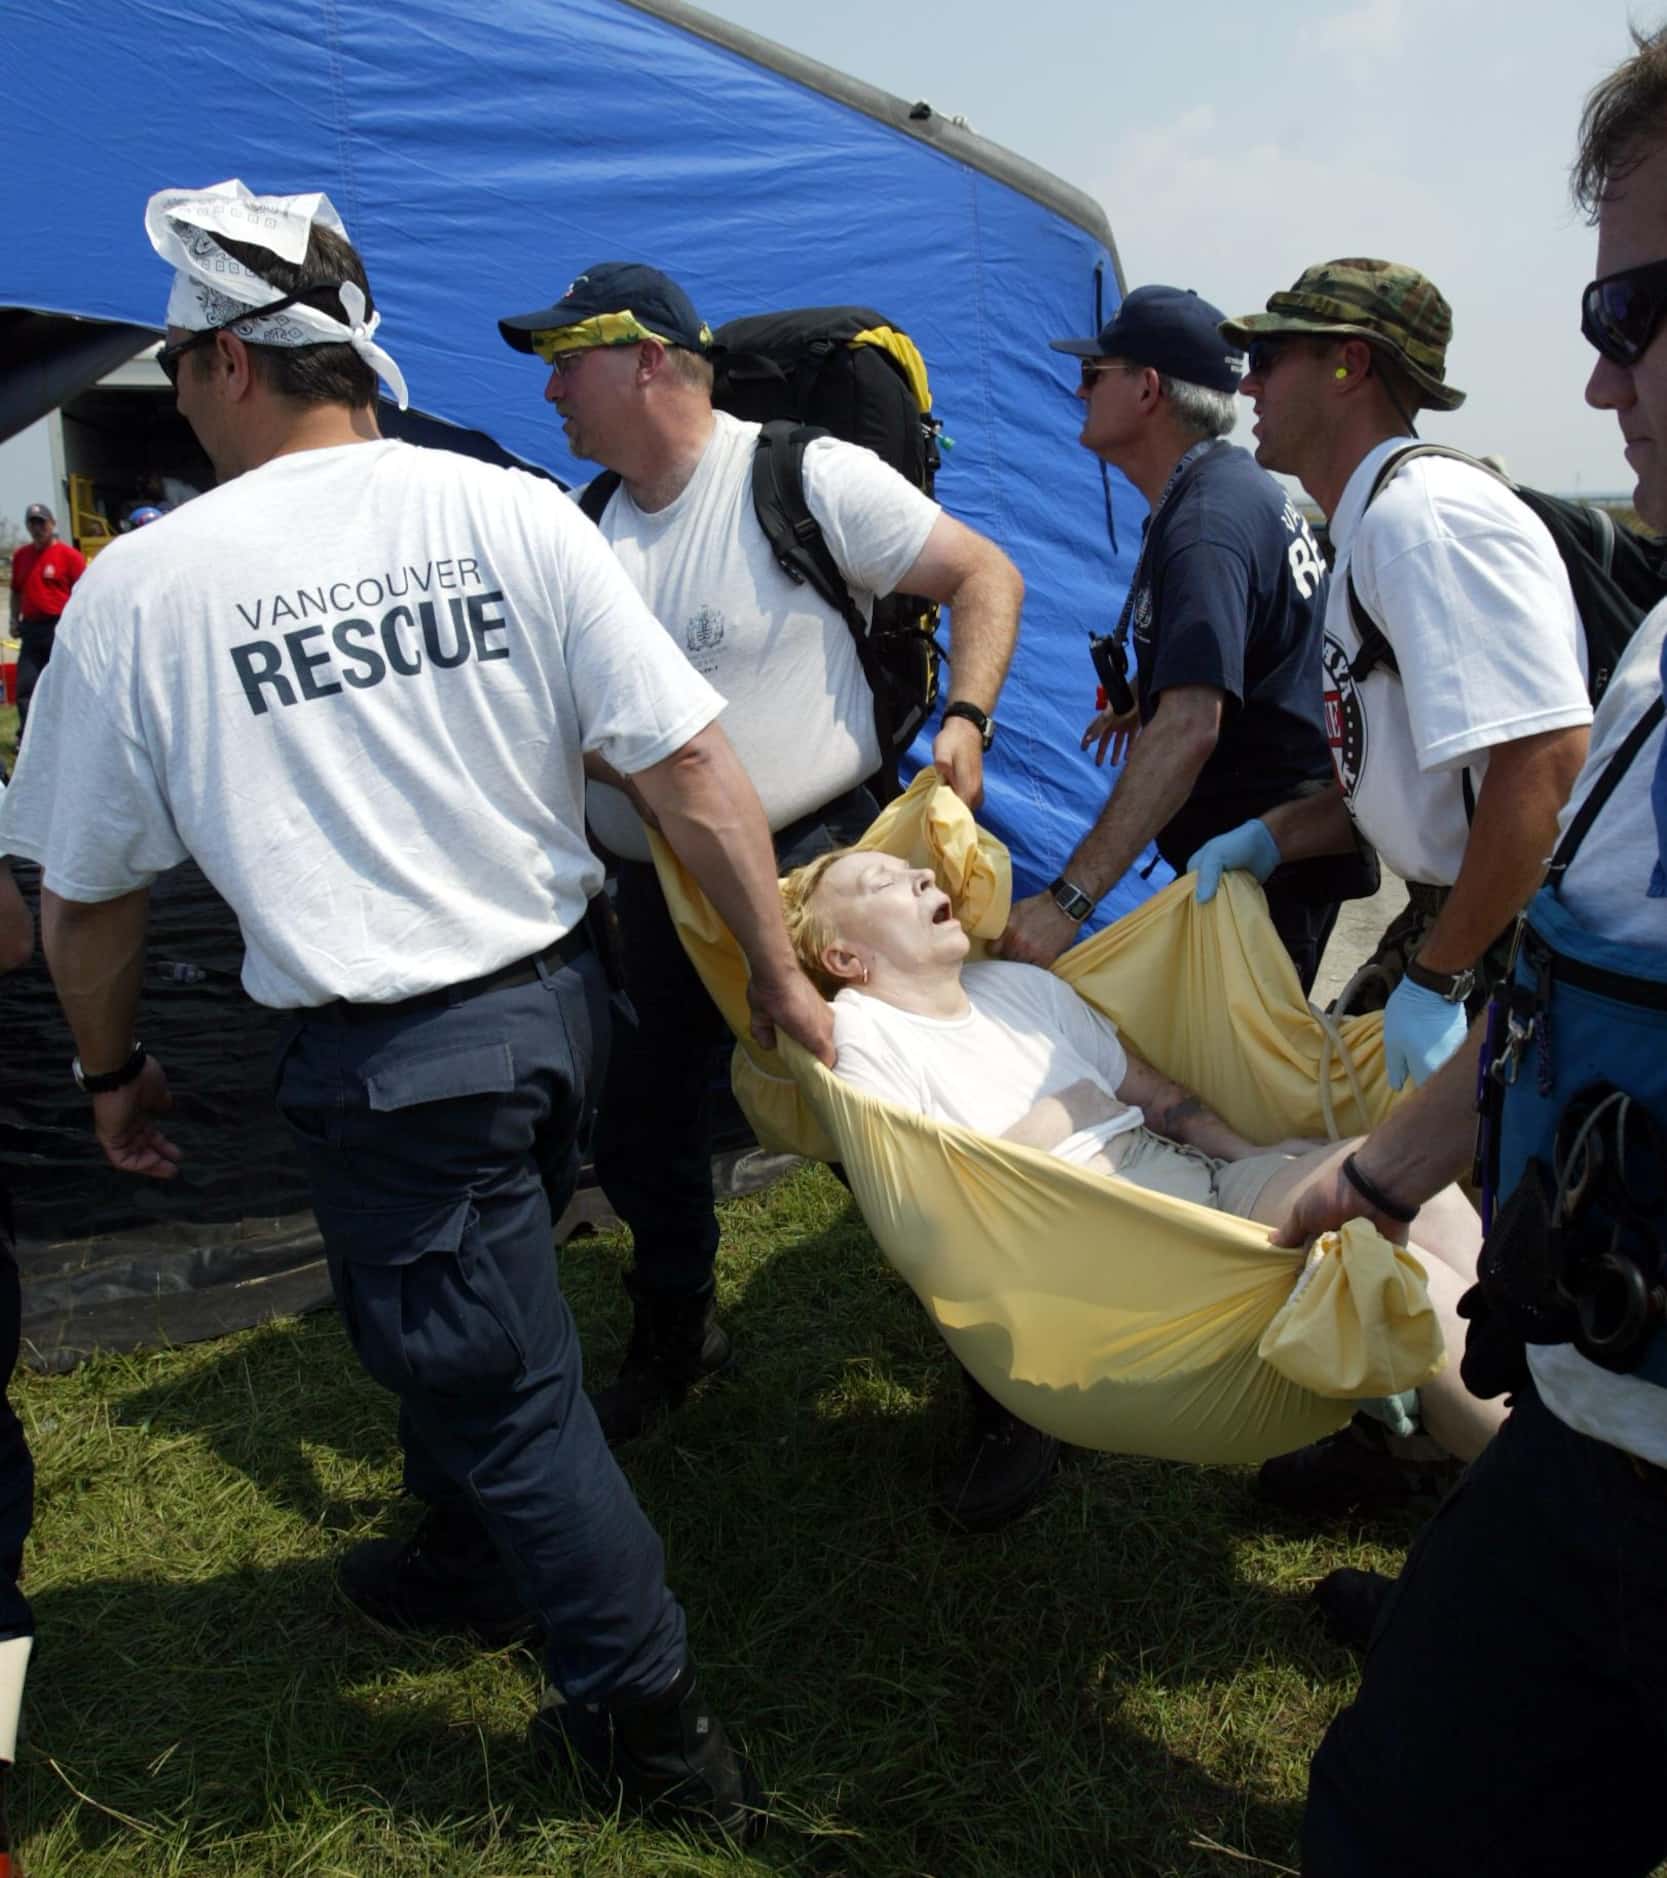 Fire and rescue team members from Vancouver, Canada, carried an elderly woman to a medical...